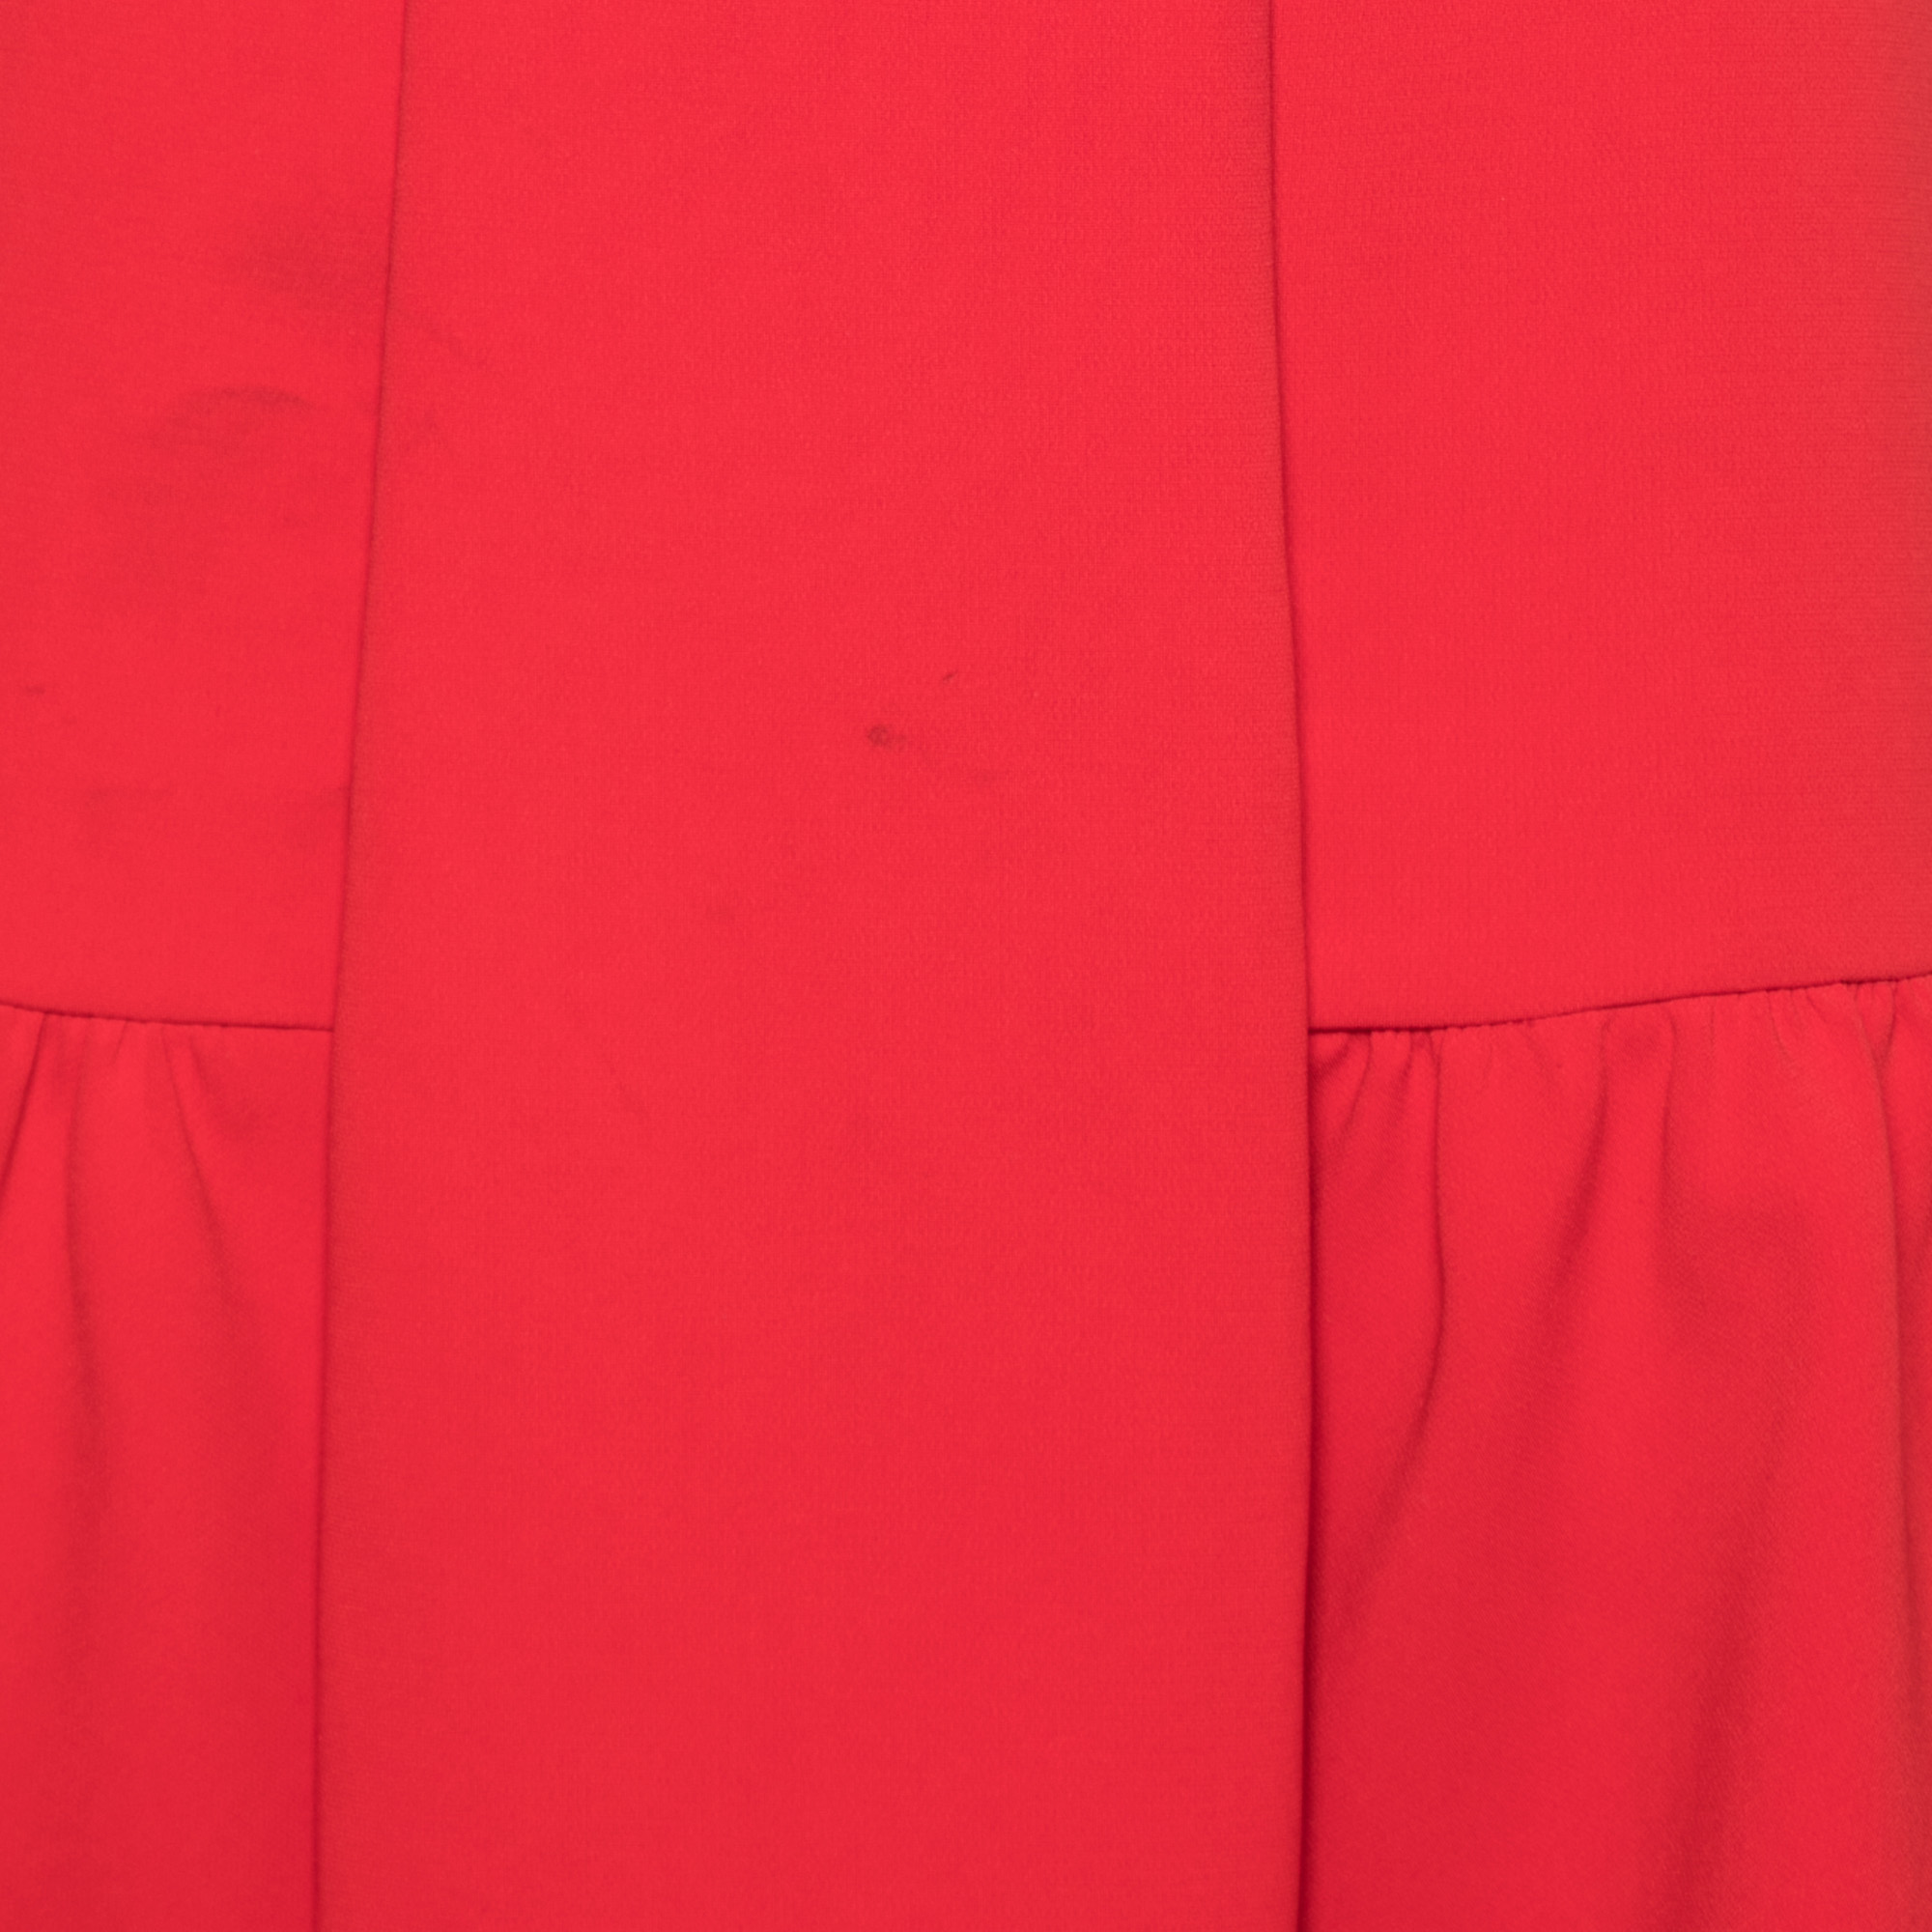 Boutique Moschino Red Crepe Flared Hem Skirt M